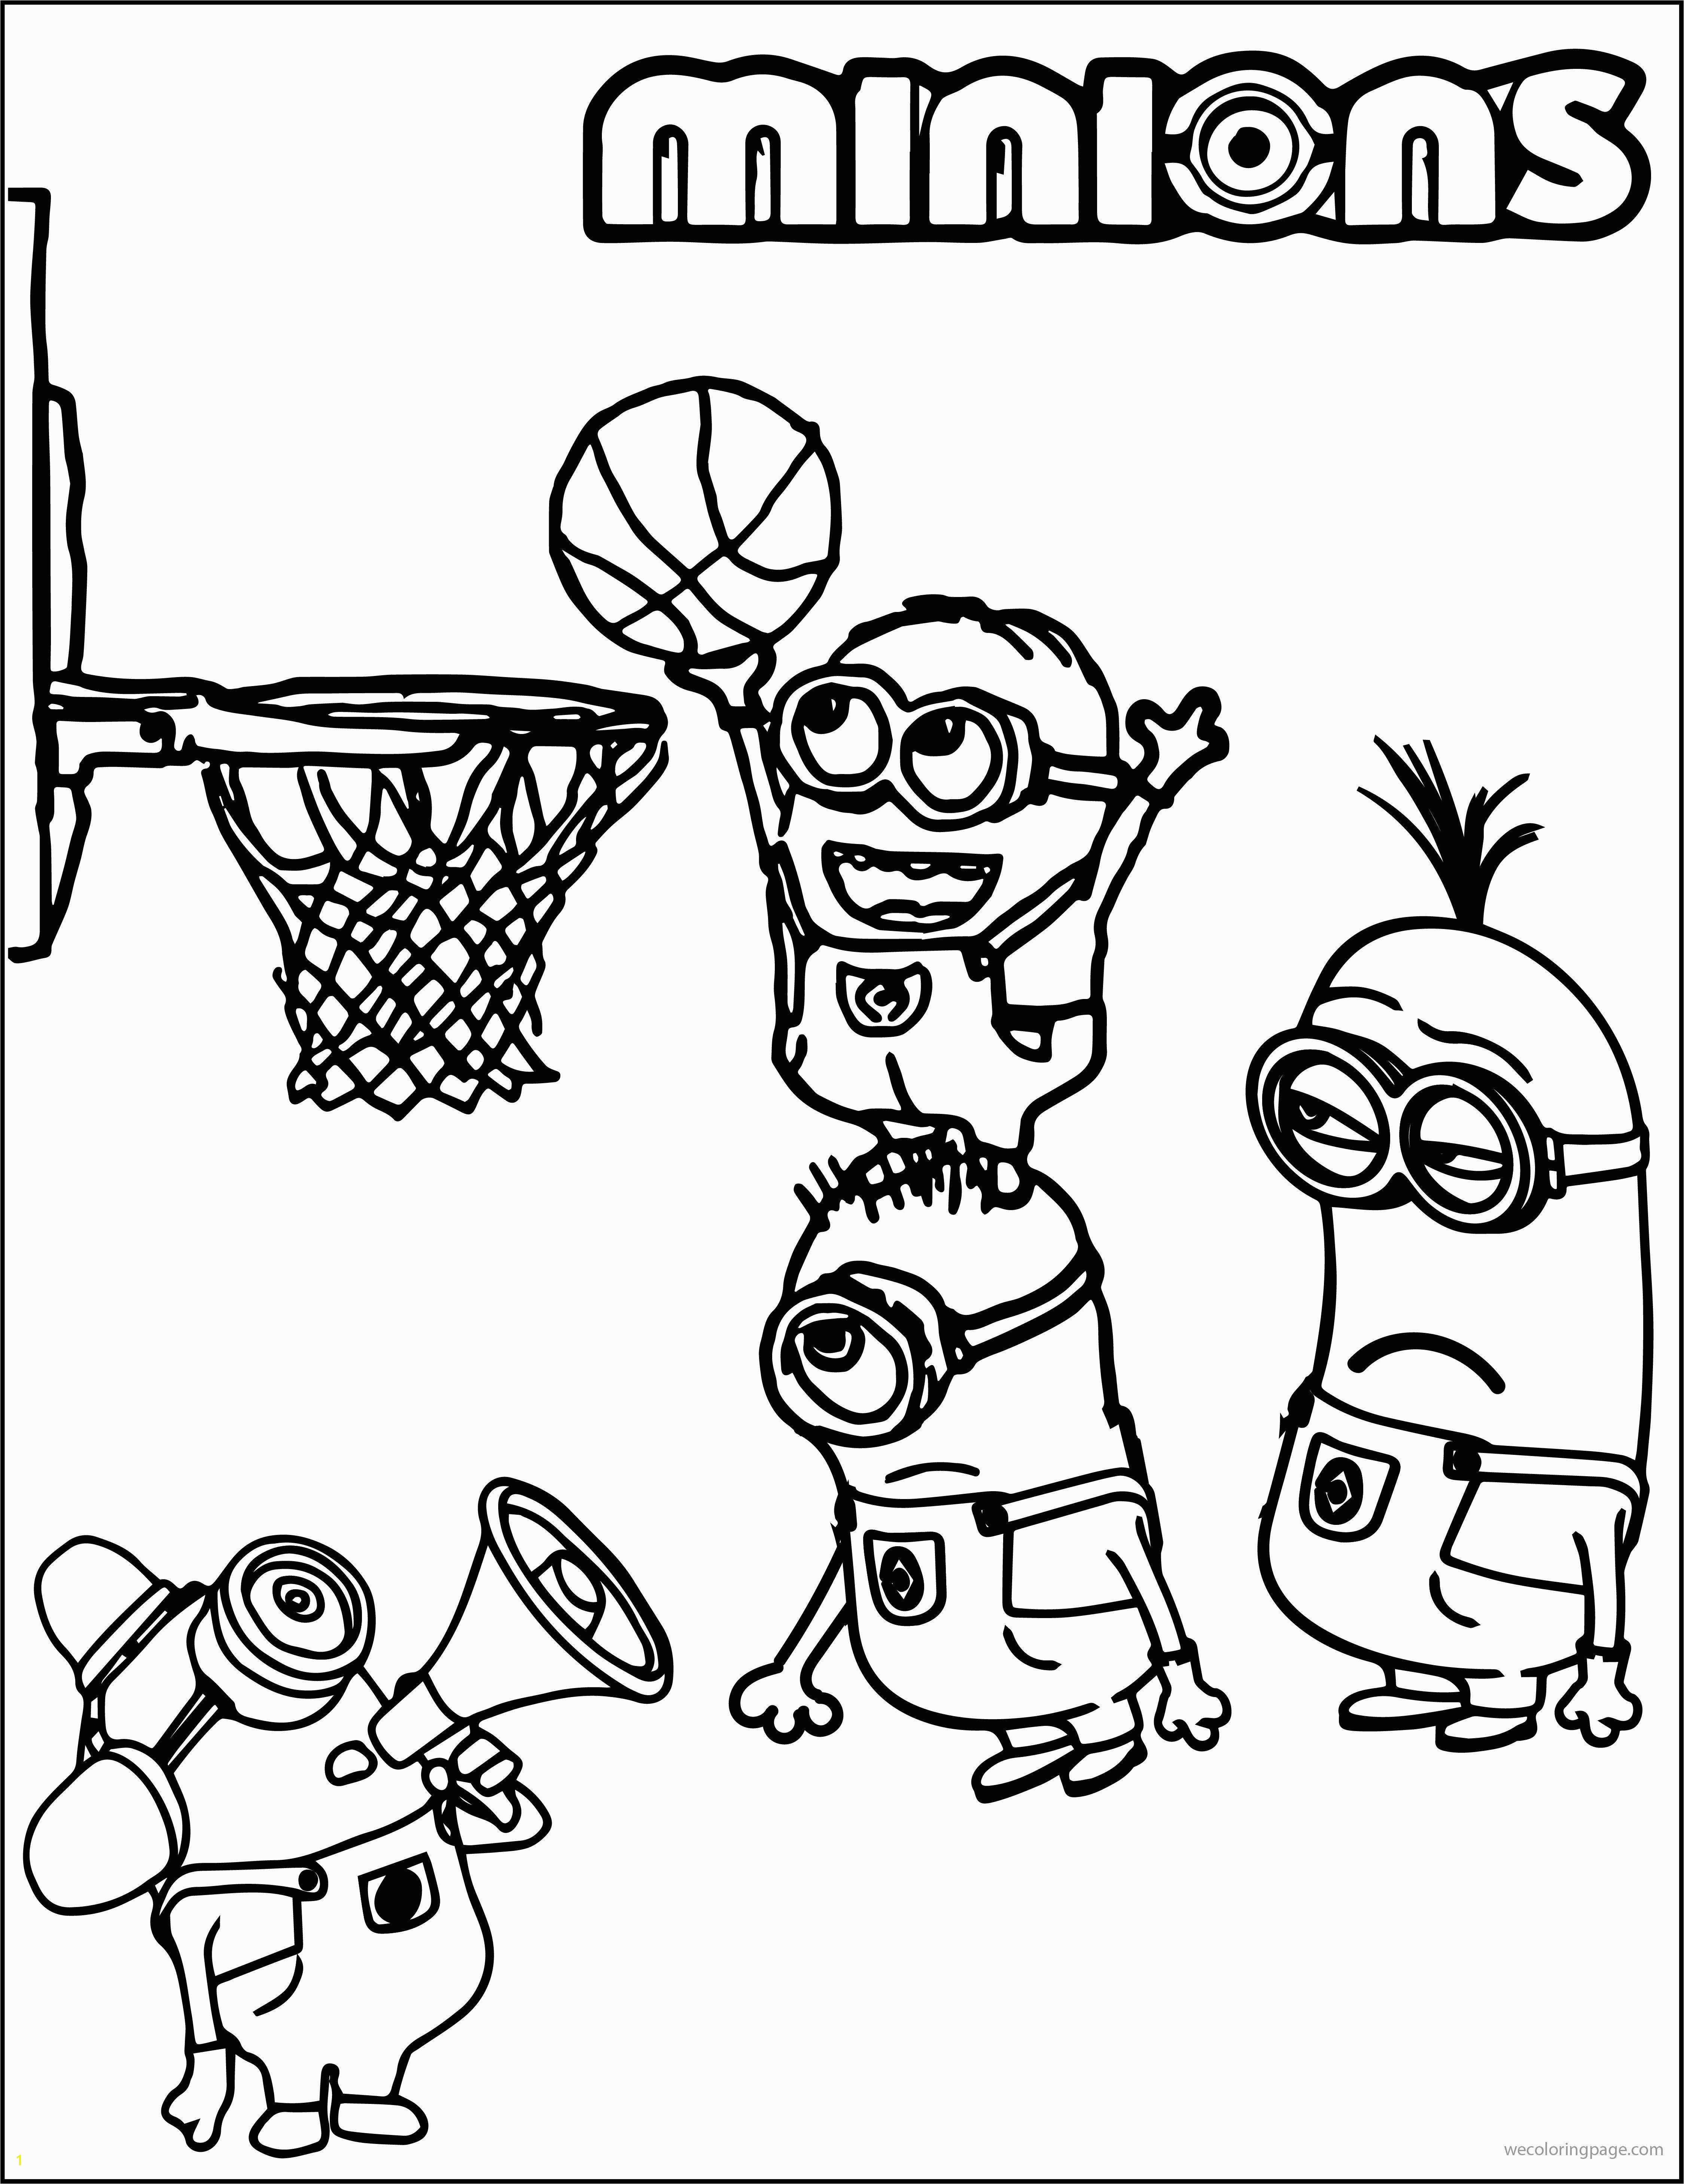 Volleyball Player Coloring Pages Minion Playing Basketball Coloring Pages